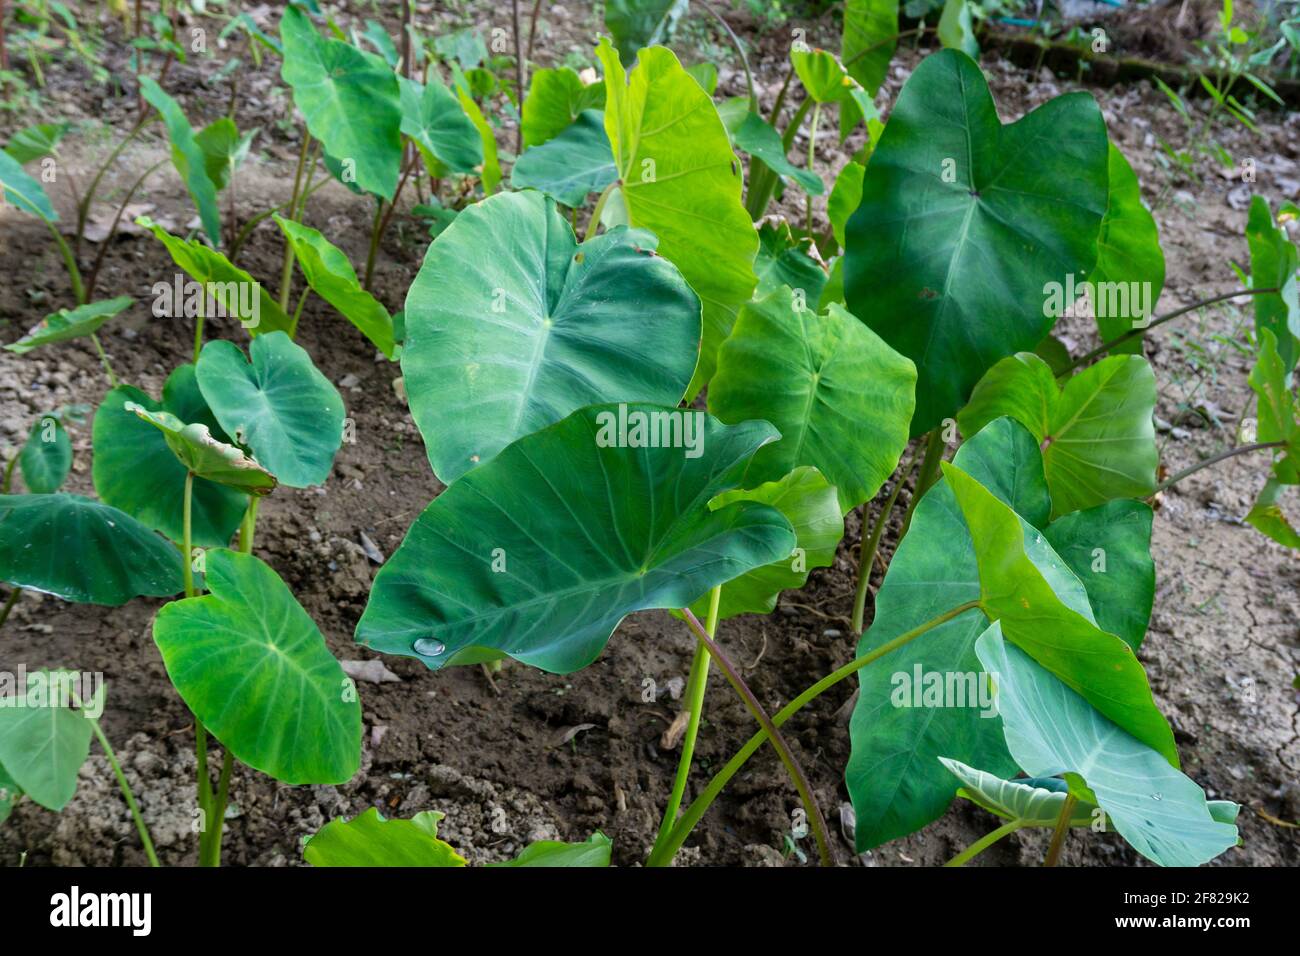 Colocasia esculenta is a tropical plant grown primarily for edible corms,a root vegetable most commonly known as taro, kalo, dasheen or godere.Used as Stock Photo